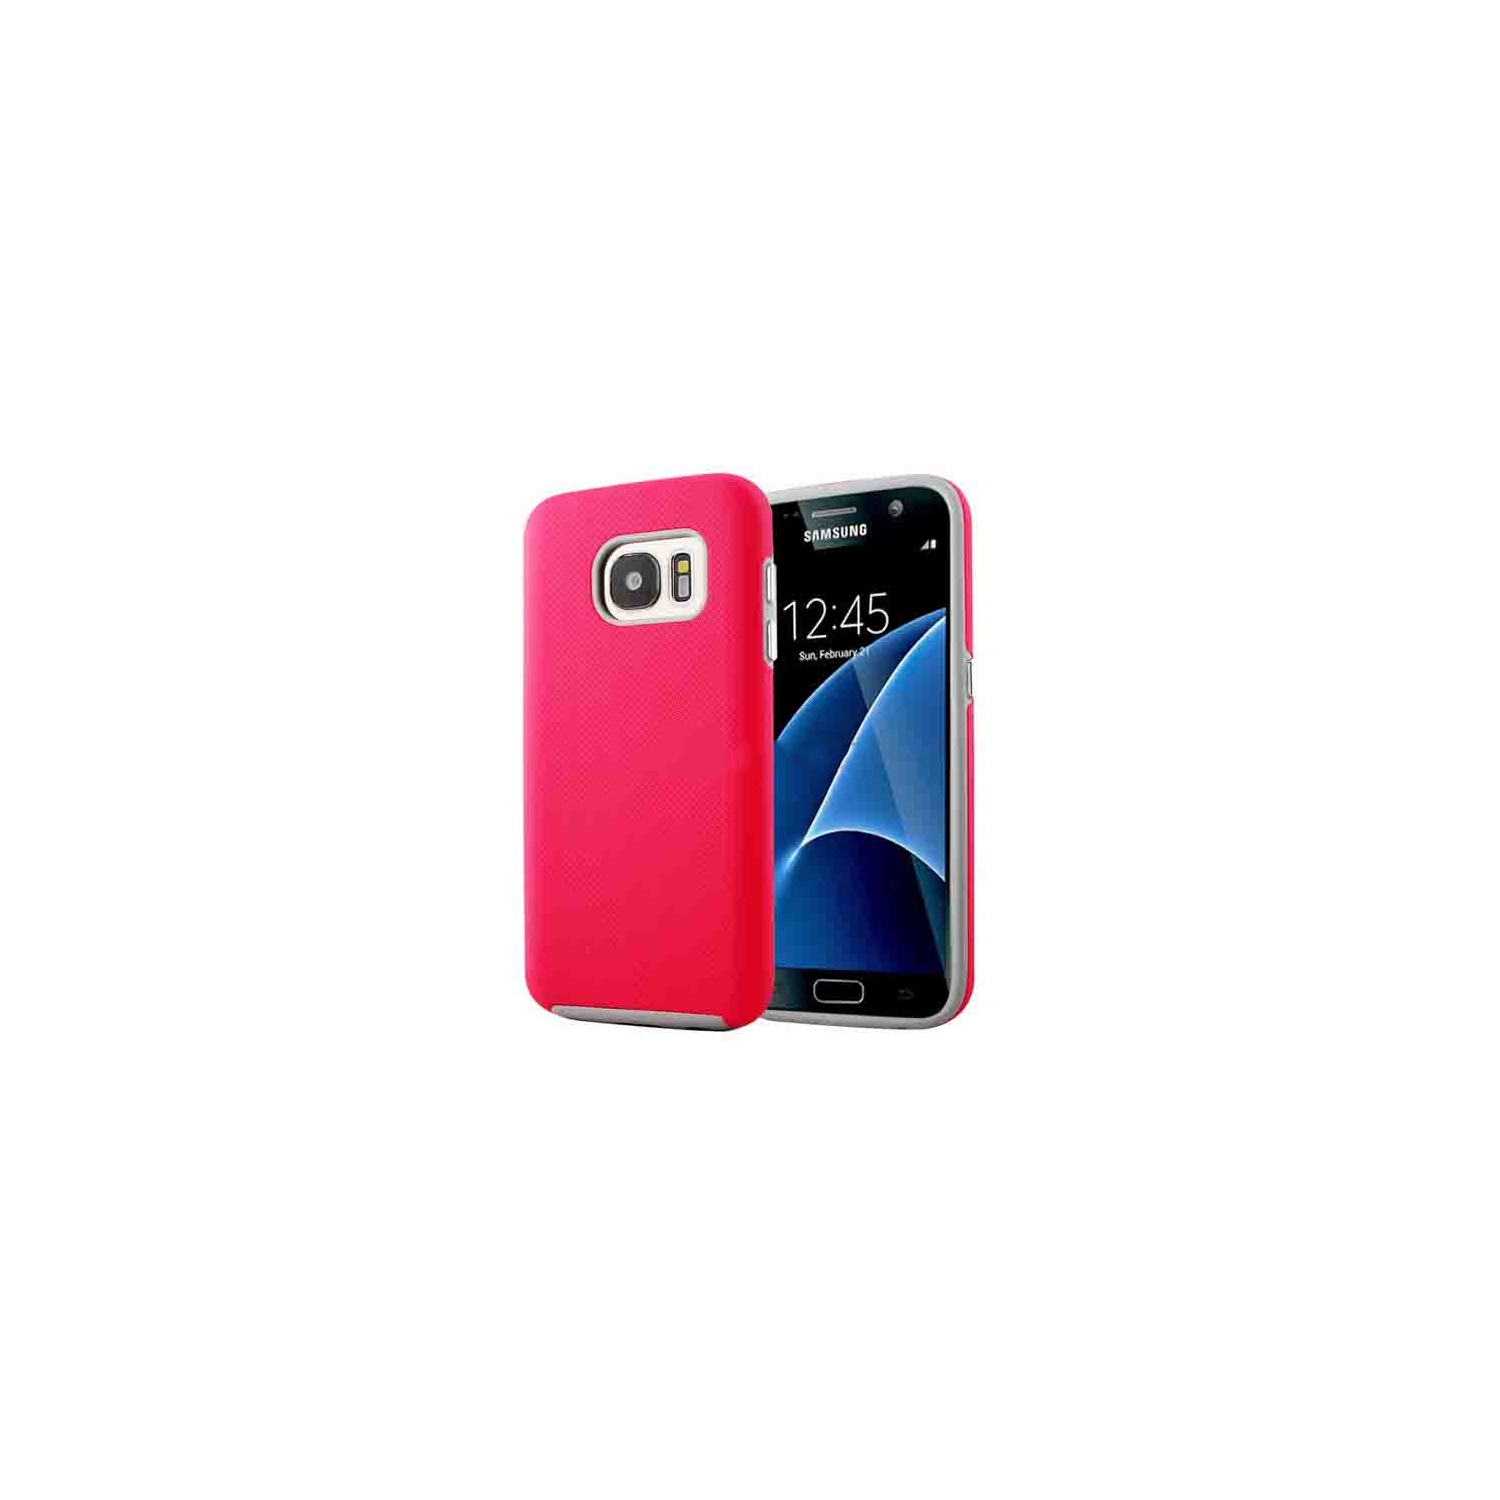 Slim Fitted Hybrid Hard PC Shell Shockproof Scratch Resistant Case Cover for Samsung Galaxy S7 (G930), Hot Pink